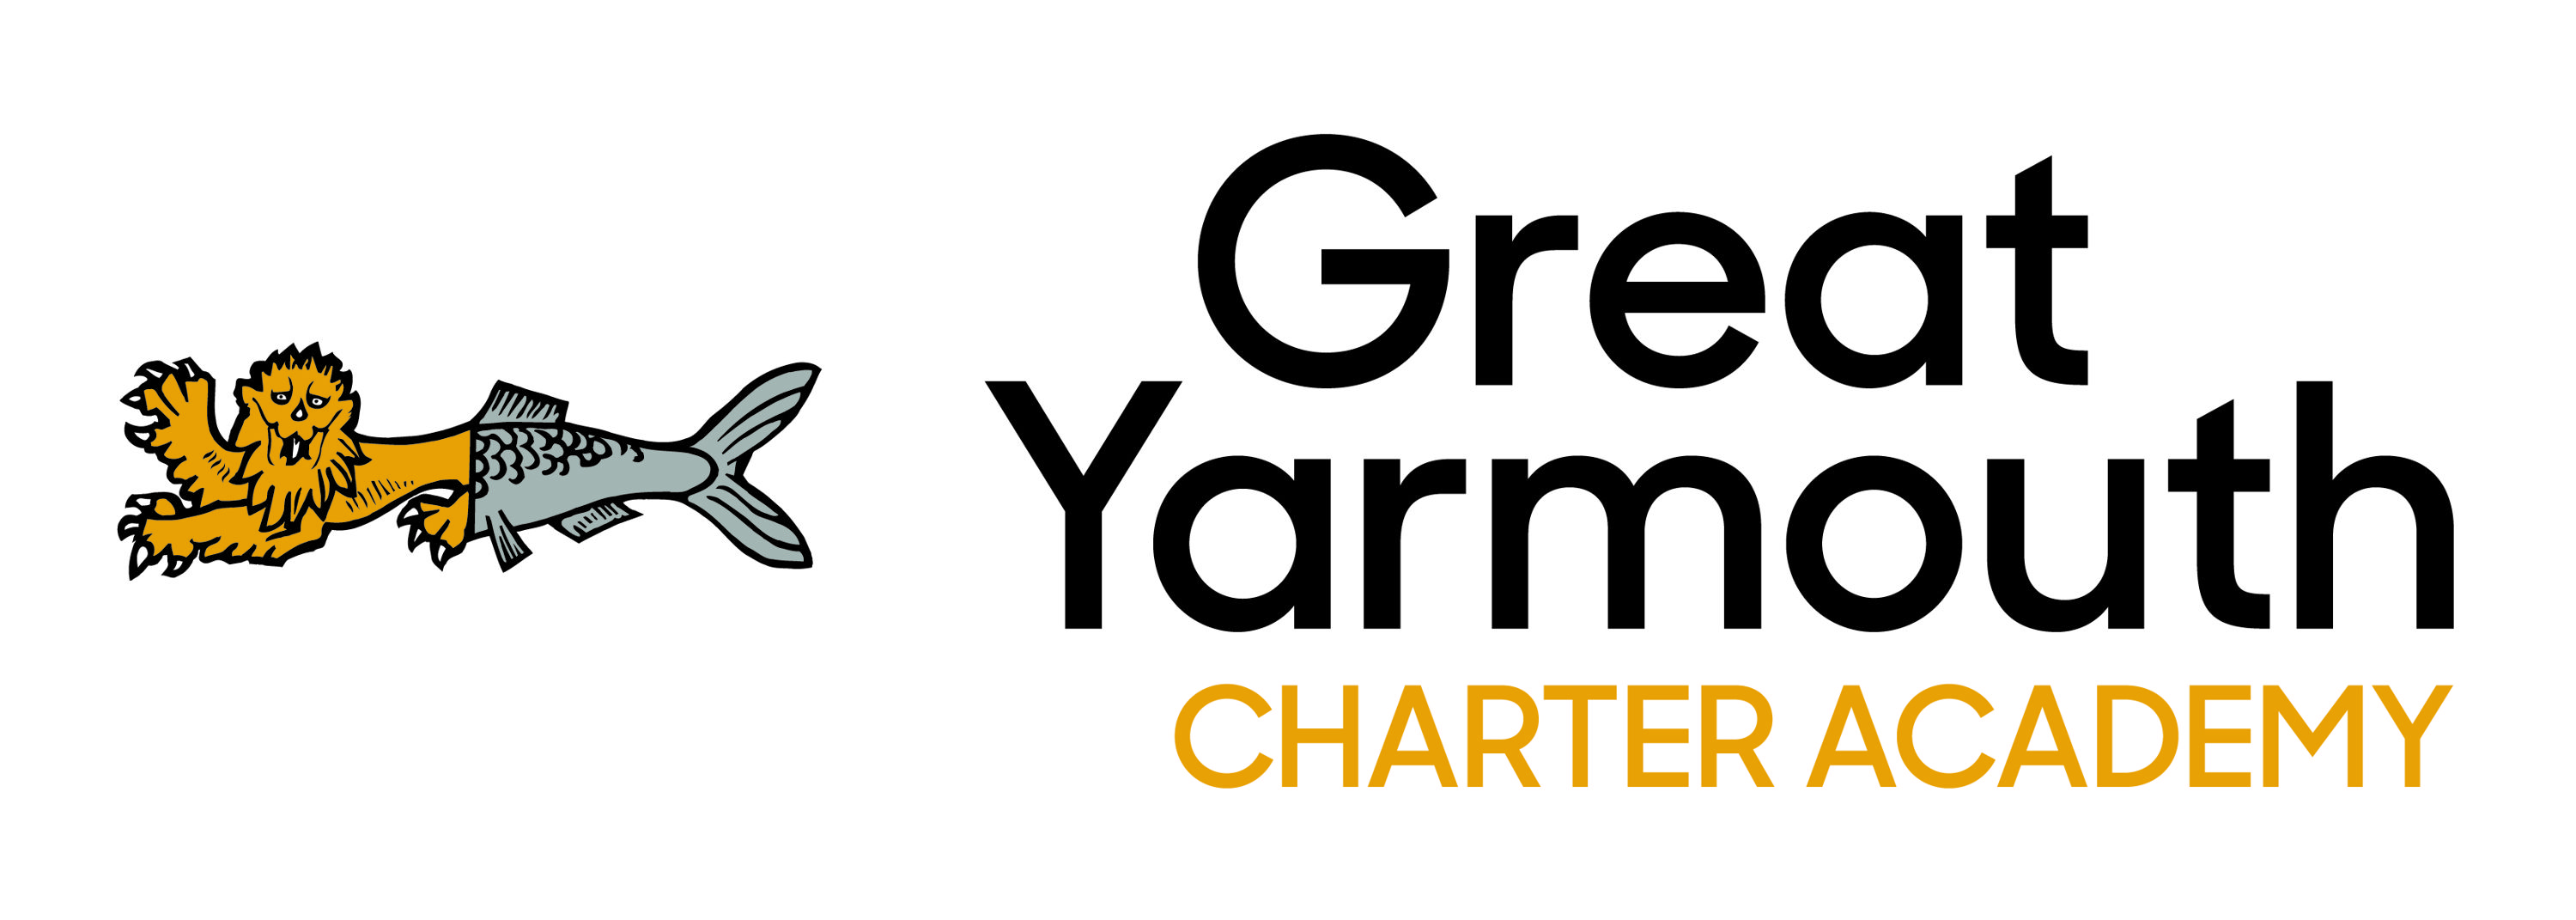 Great Yarmouth Charter Academy